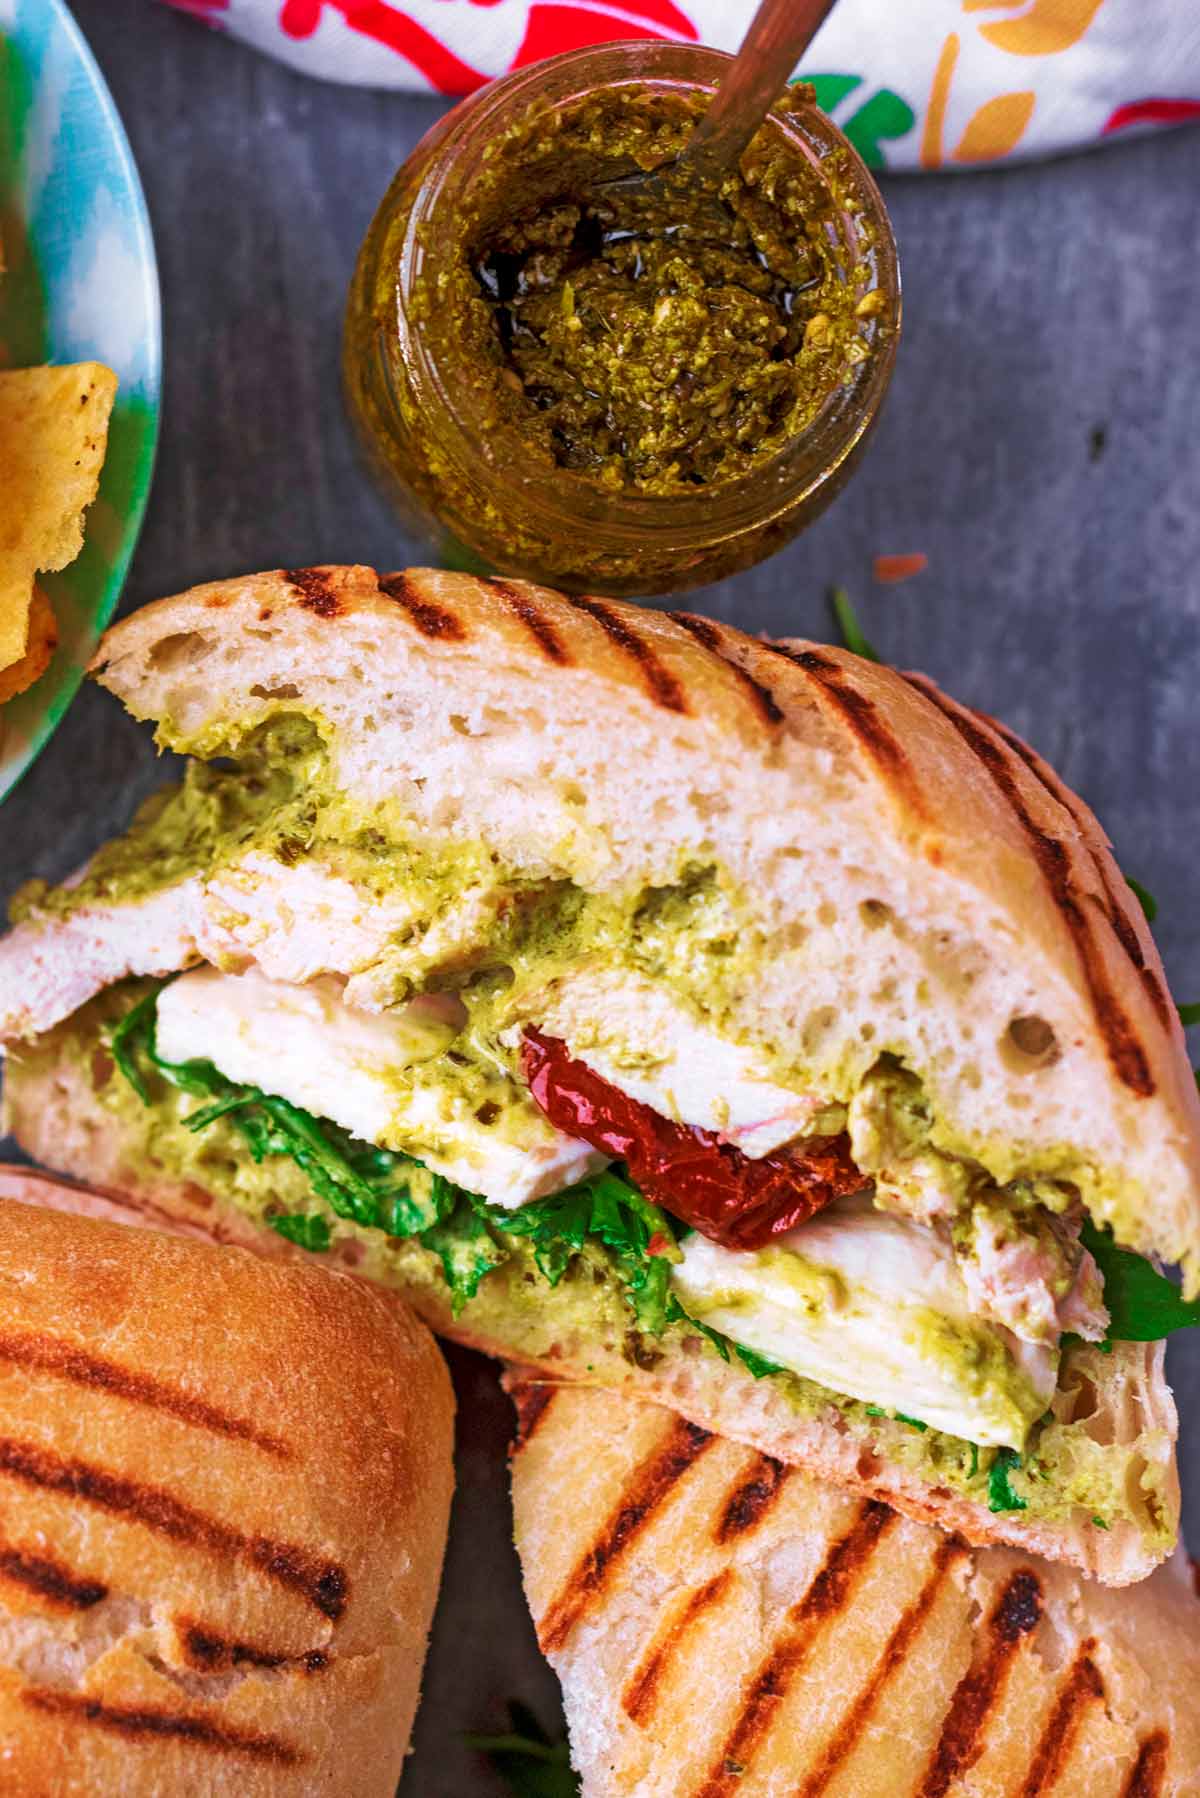 A ciabatta bun with chicken, lettuce, tomatoes and pesto sliced in half next to a jar of pesto.